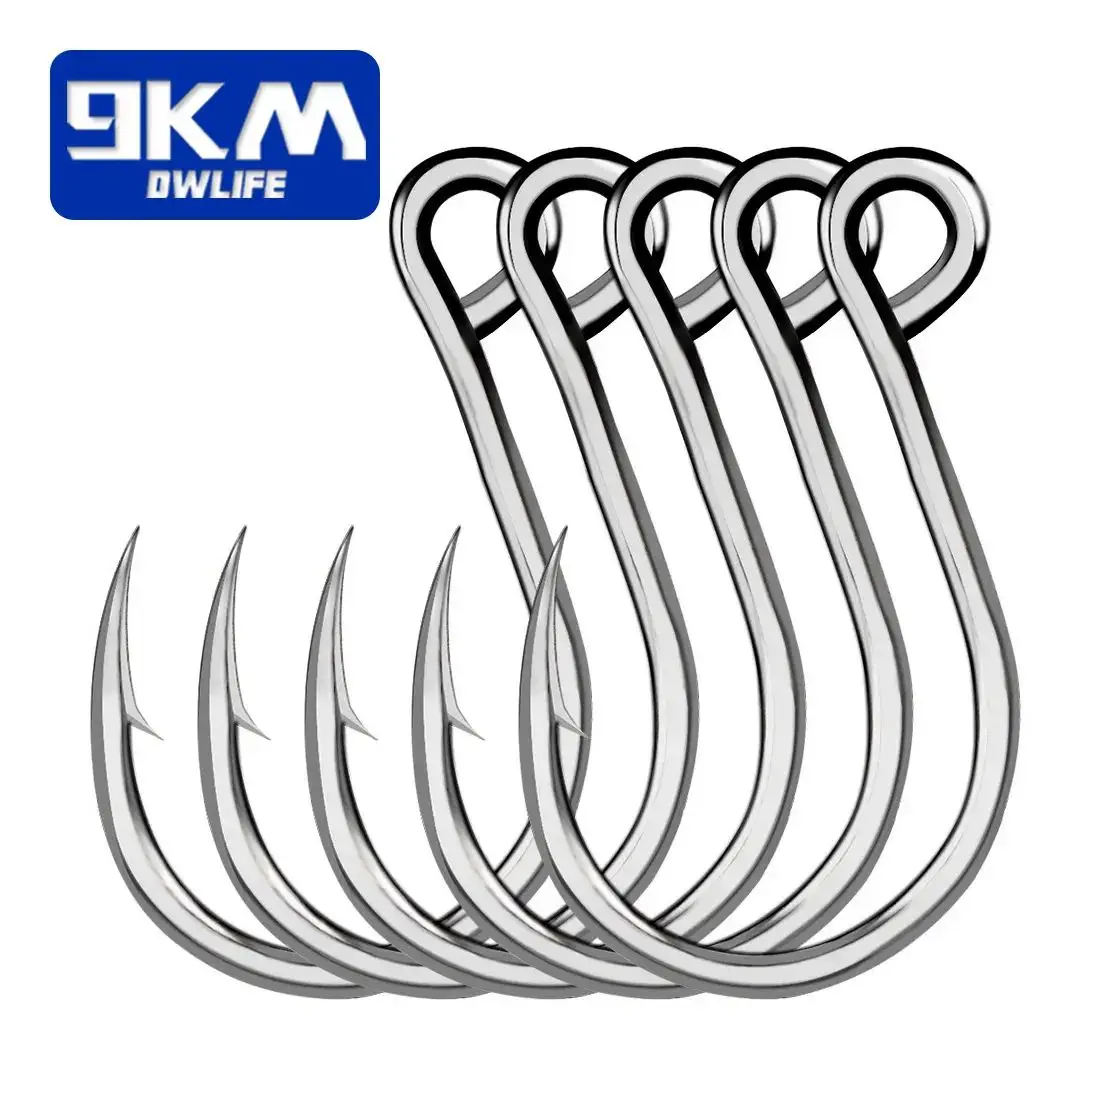 Bass Fishing Offset Worm Hooks Kit 50pcs 2X Strong High Carbon Steel Bait  Jig Fish Hooks for Bass Trout Saltwater Freshwater Fishing with Box Packed